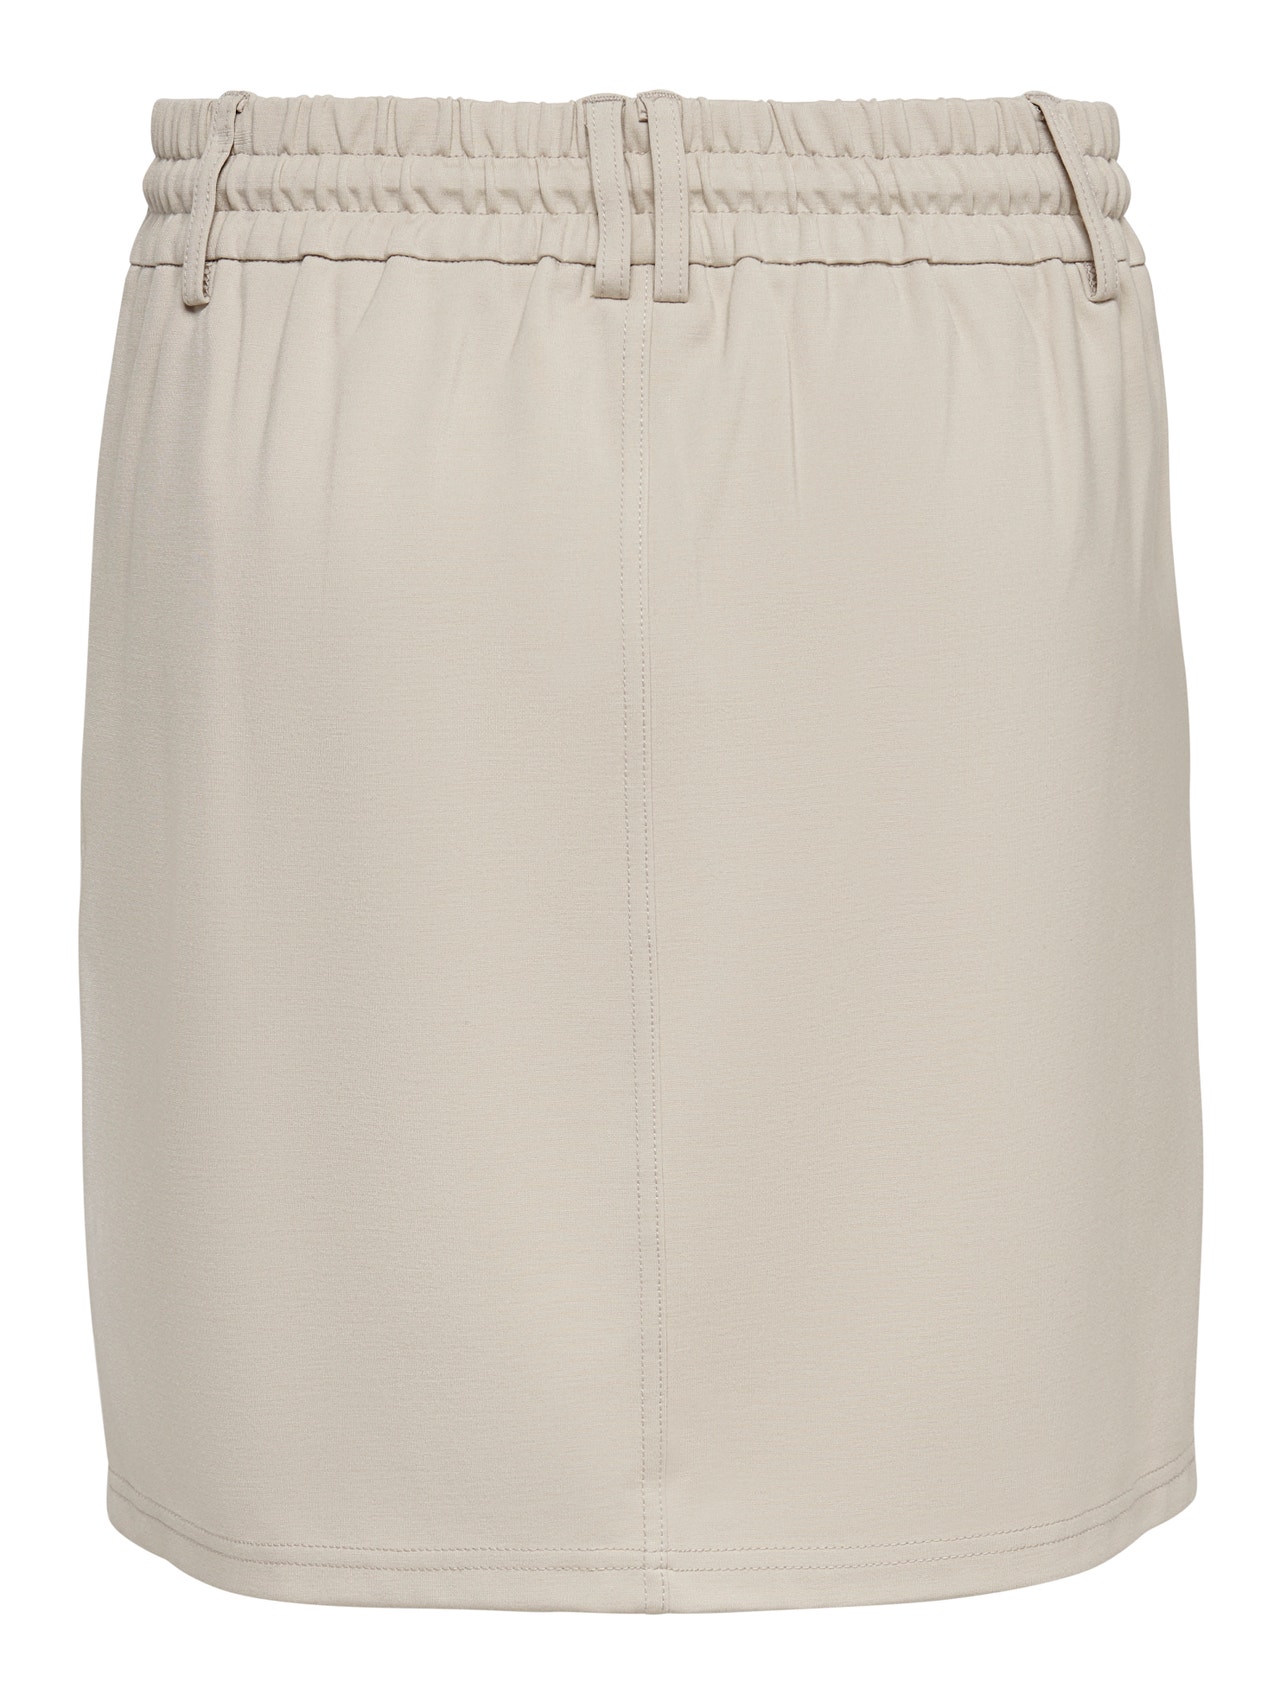 ONLY Short skirt -Pumice Stone - 15132895